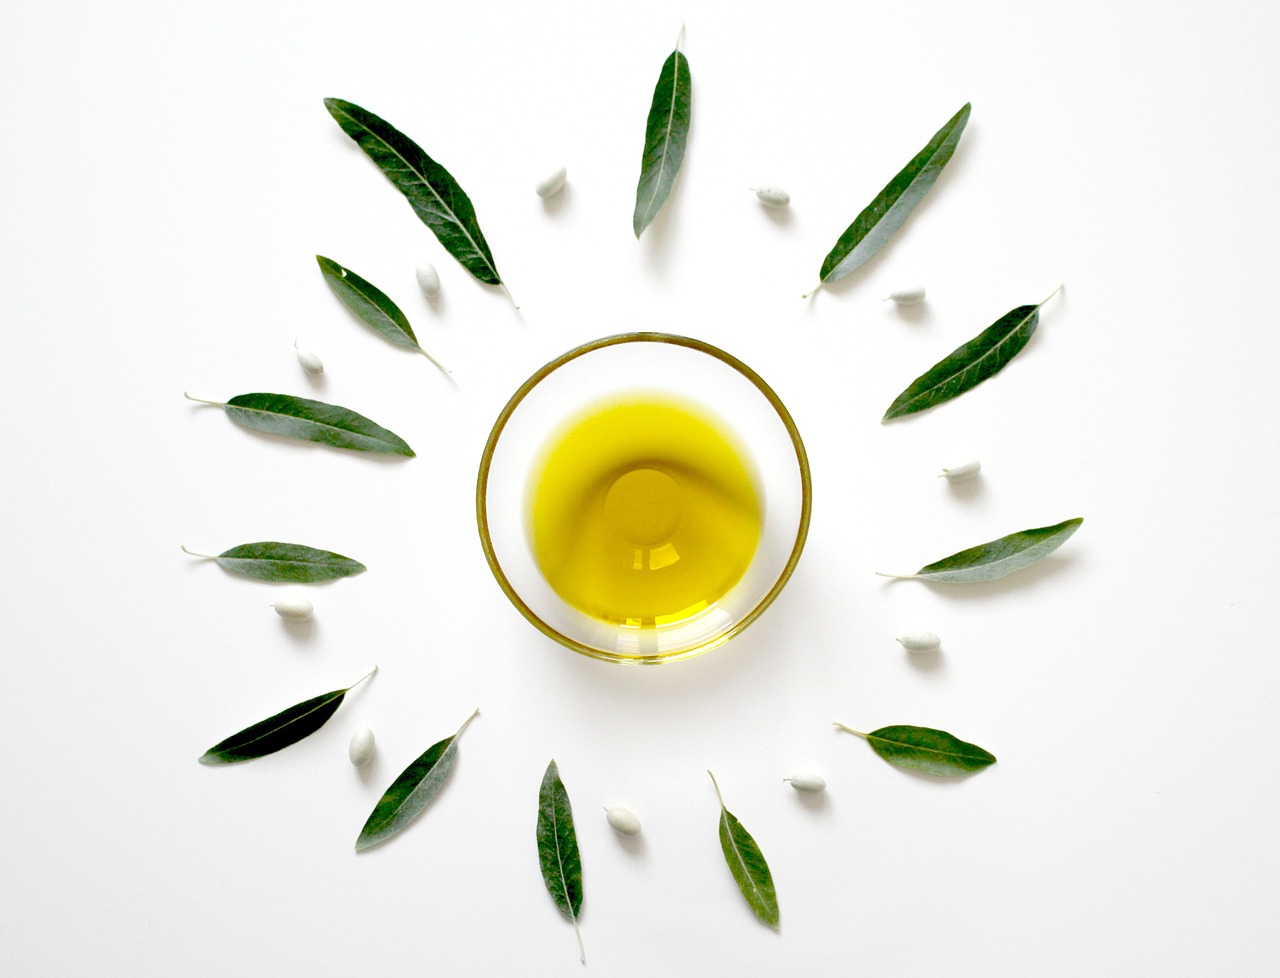 Olive oil is excellent for the skin and has an entirely natural composition